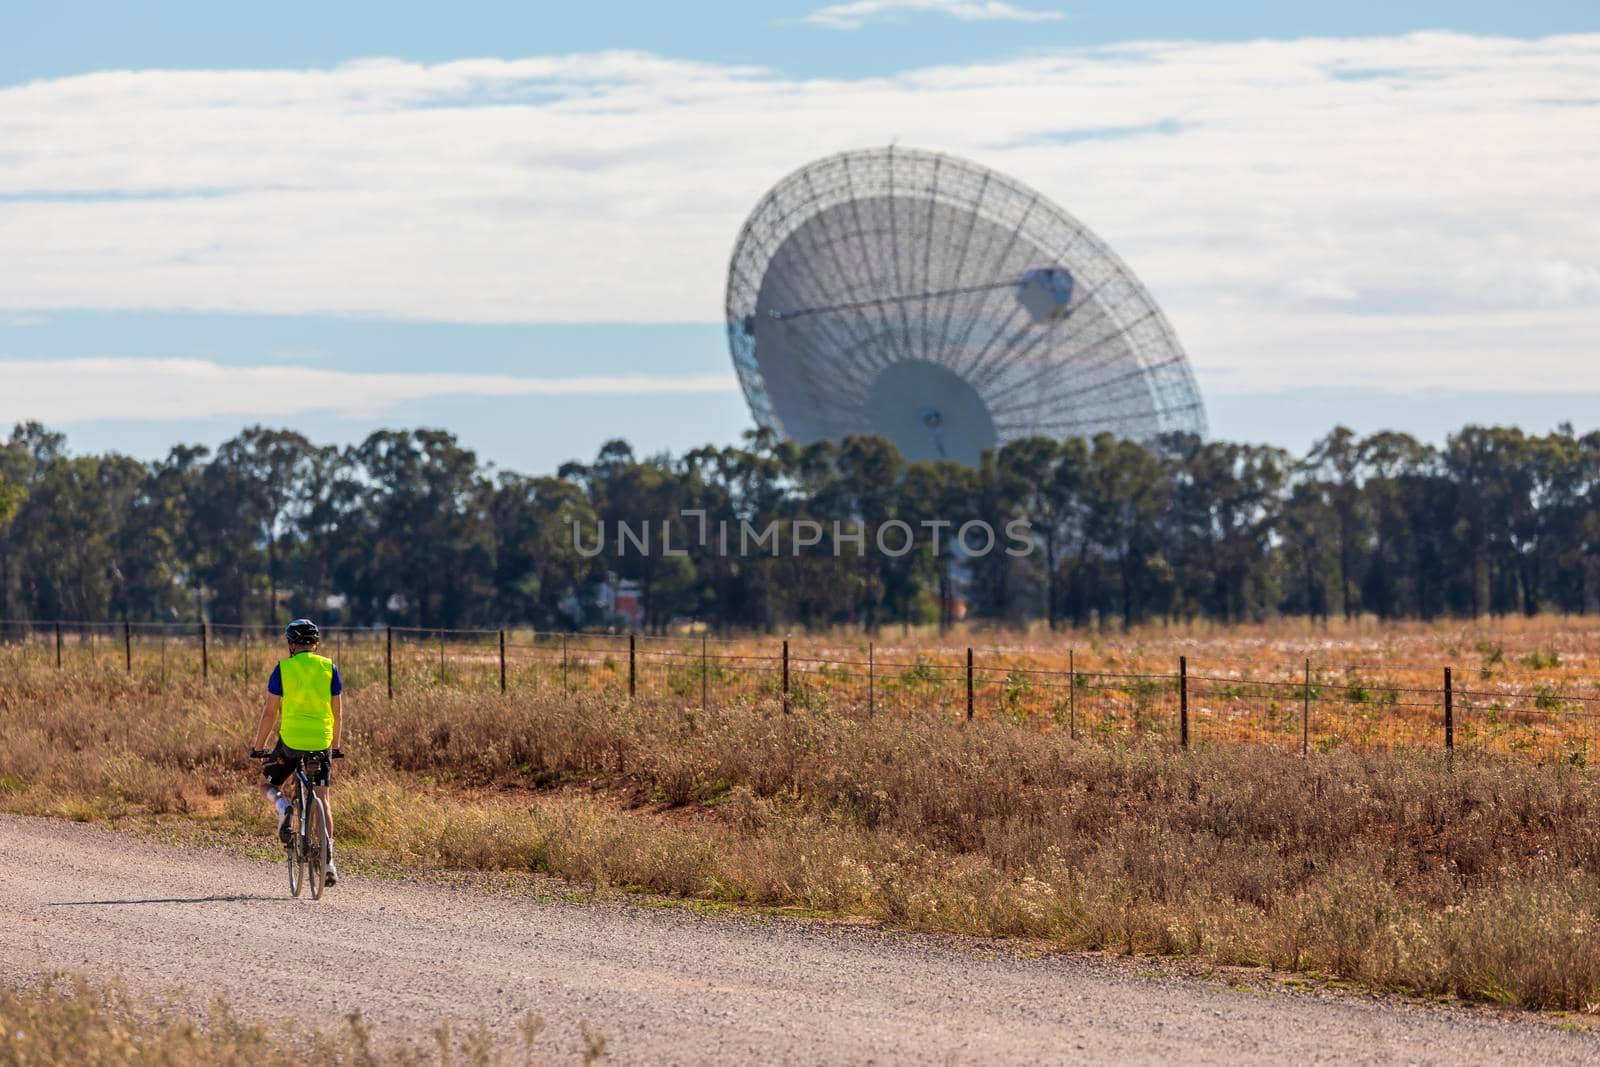 A bicycle rider on a dirt road approaching a large outdoor scientific radio telescope